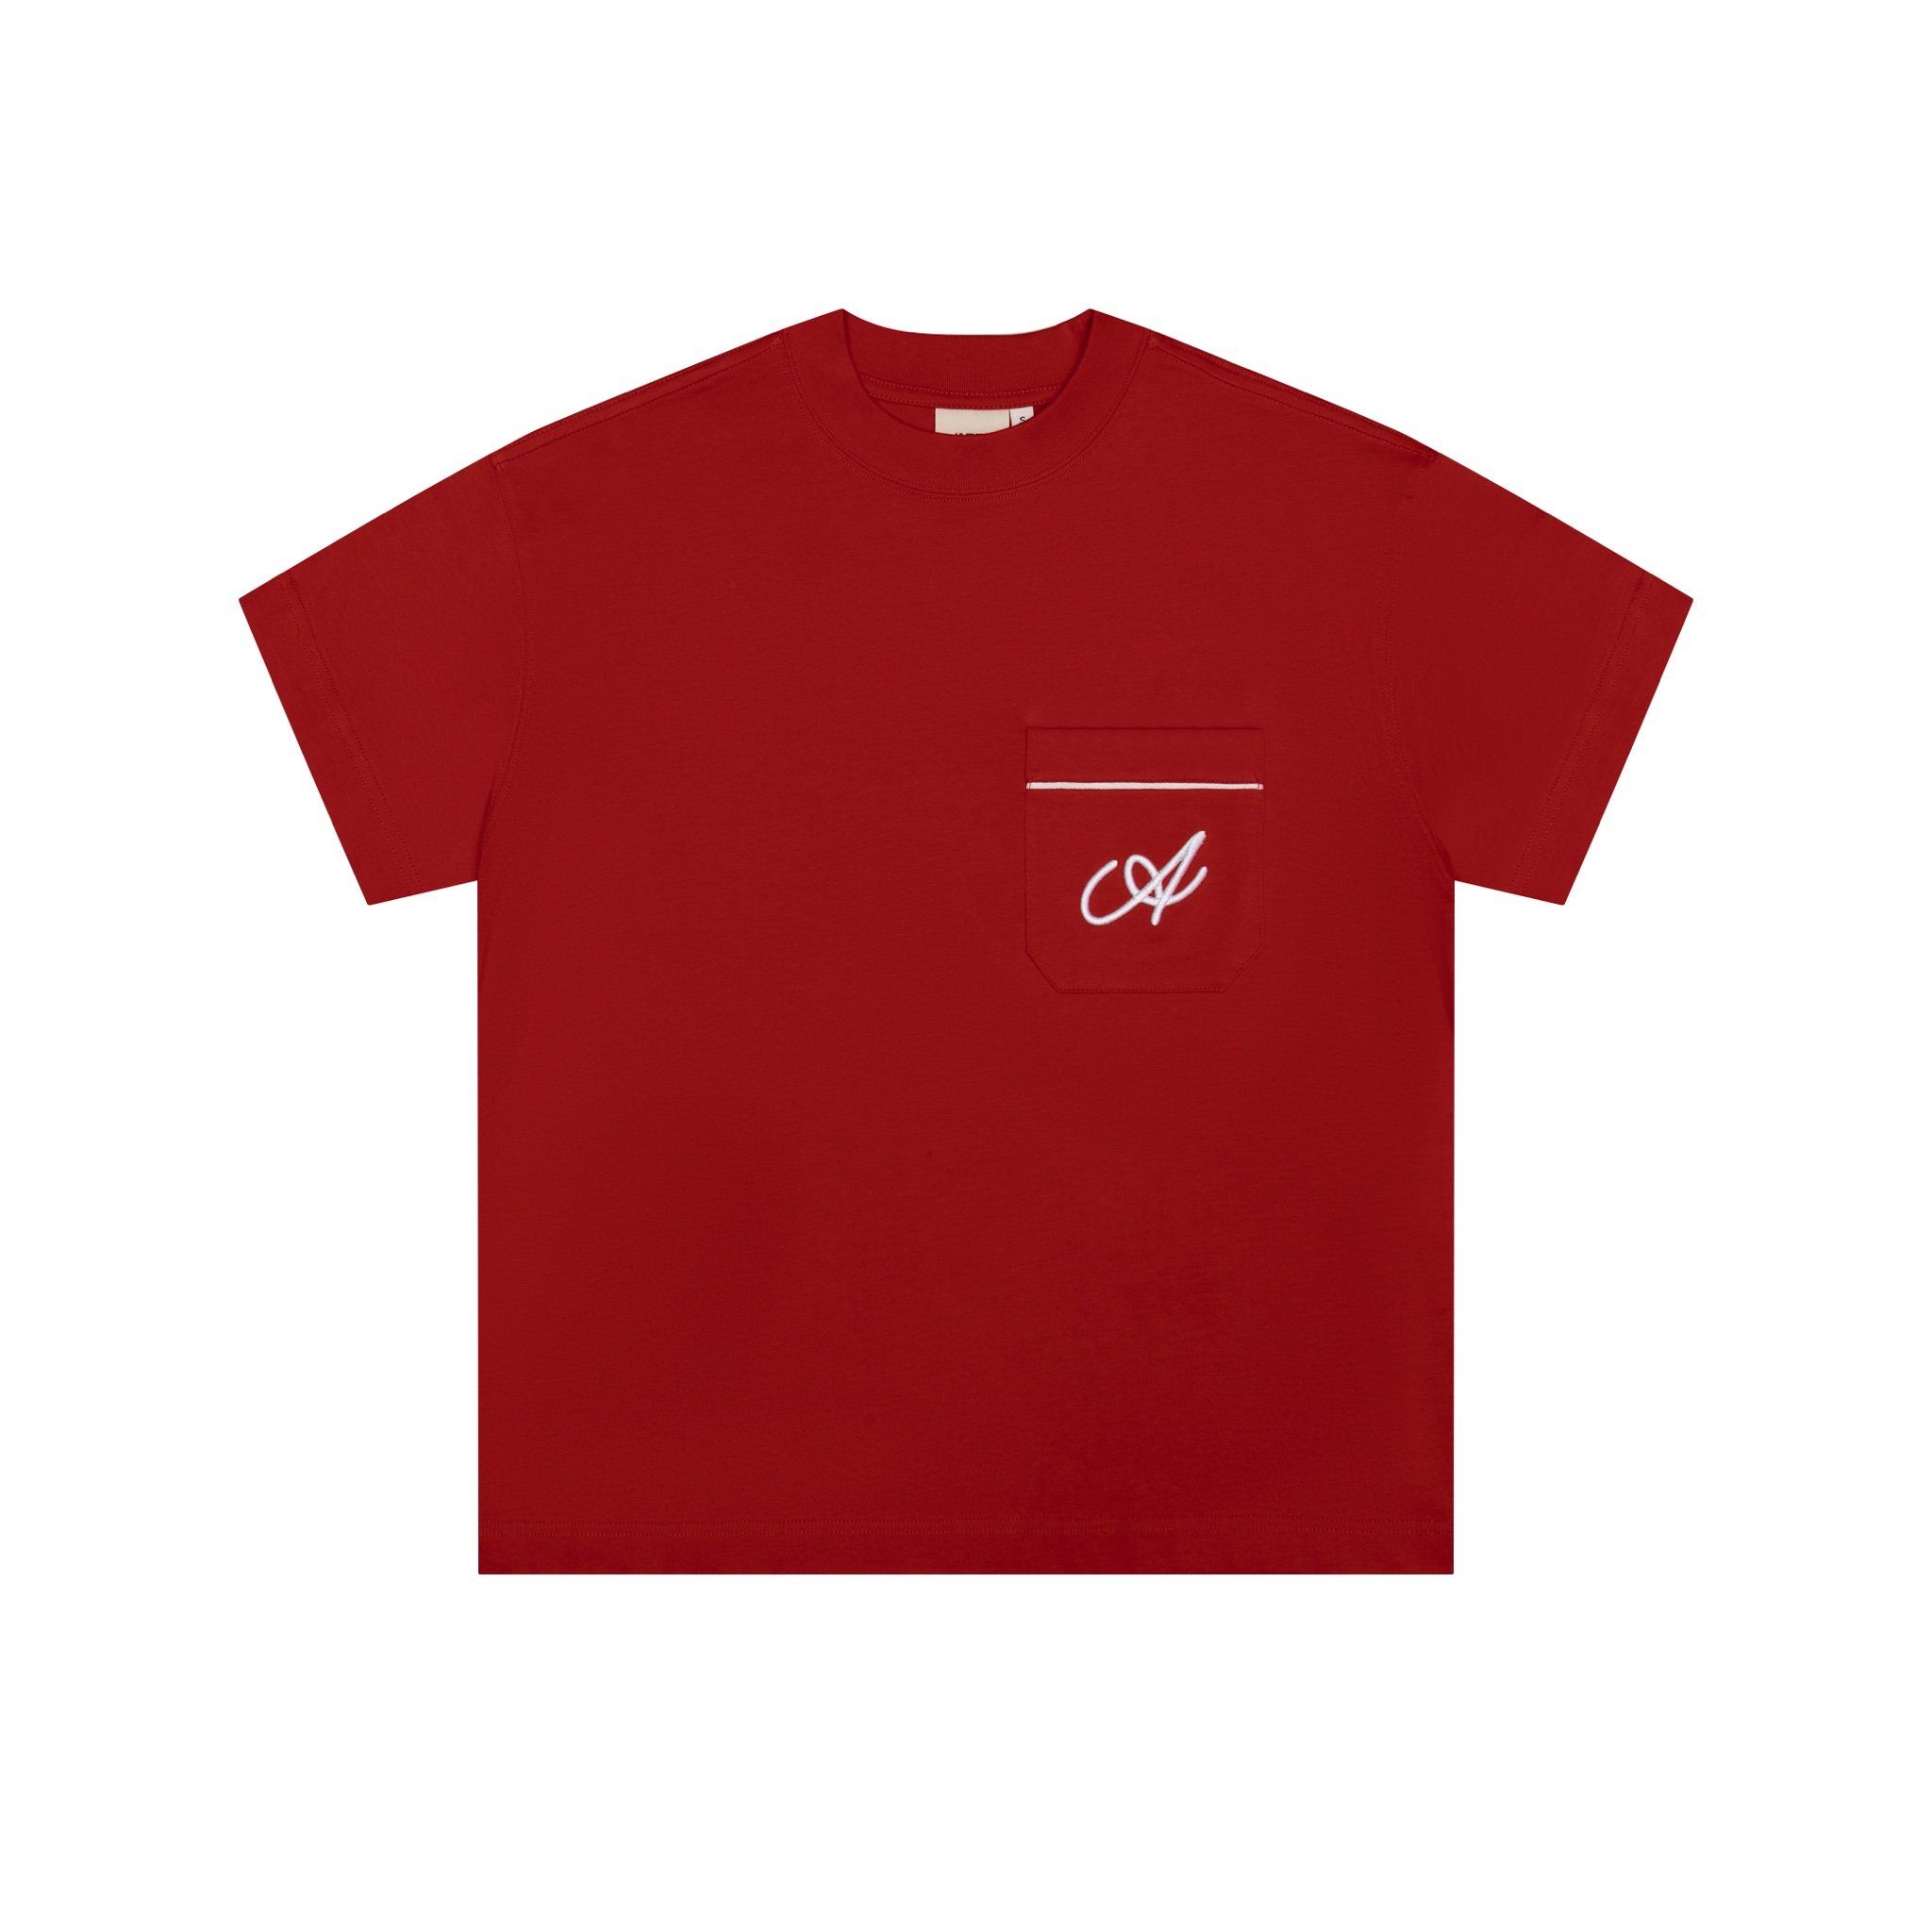  Embroidery Pocket TShirt - Red 